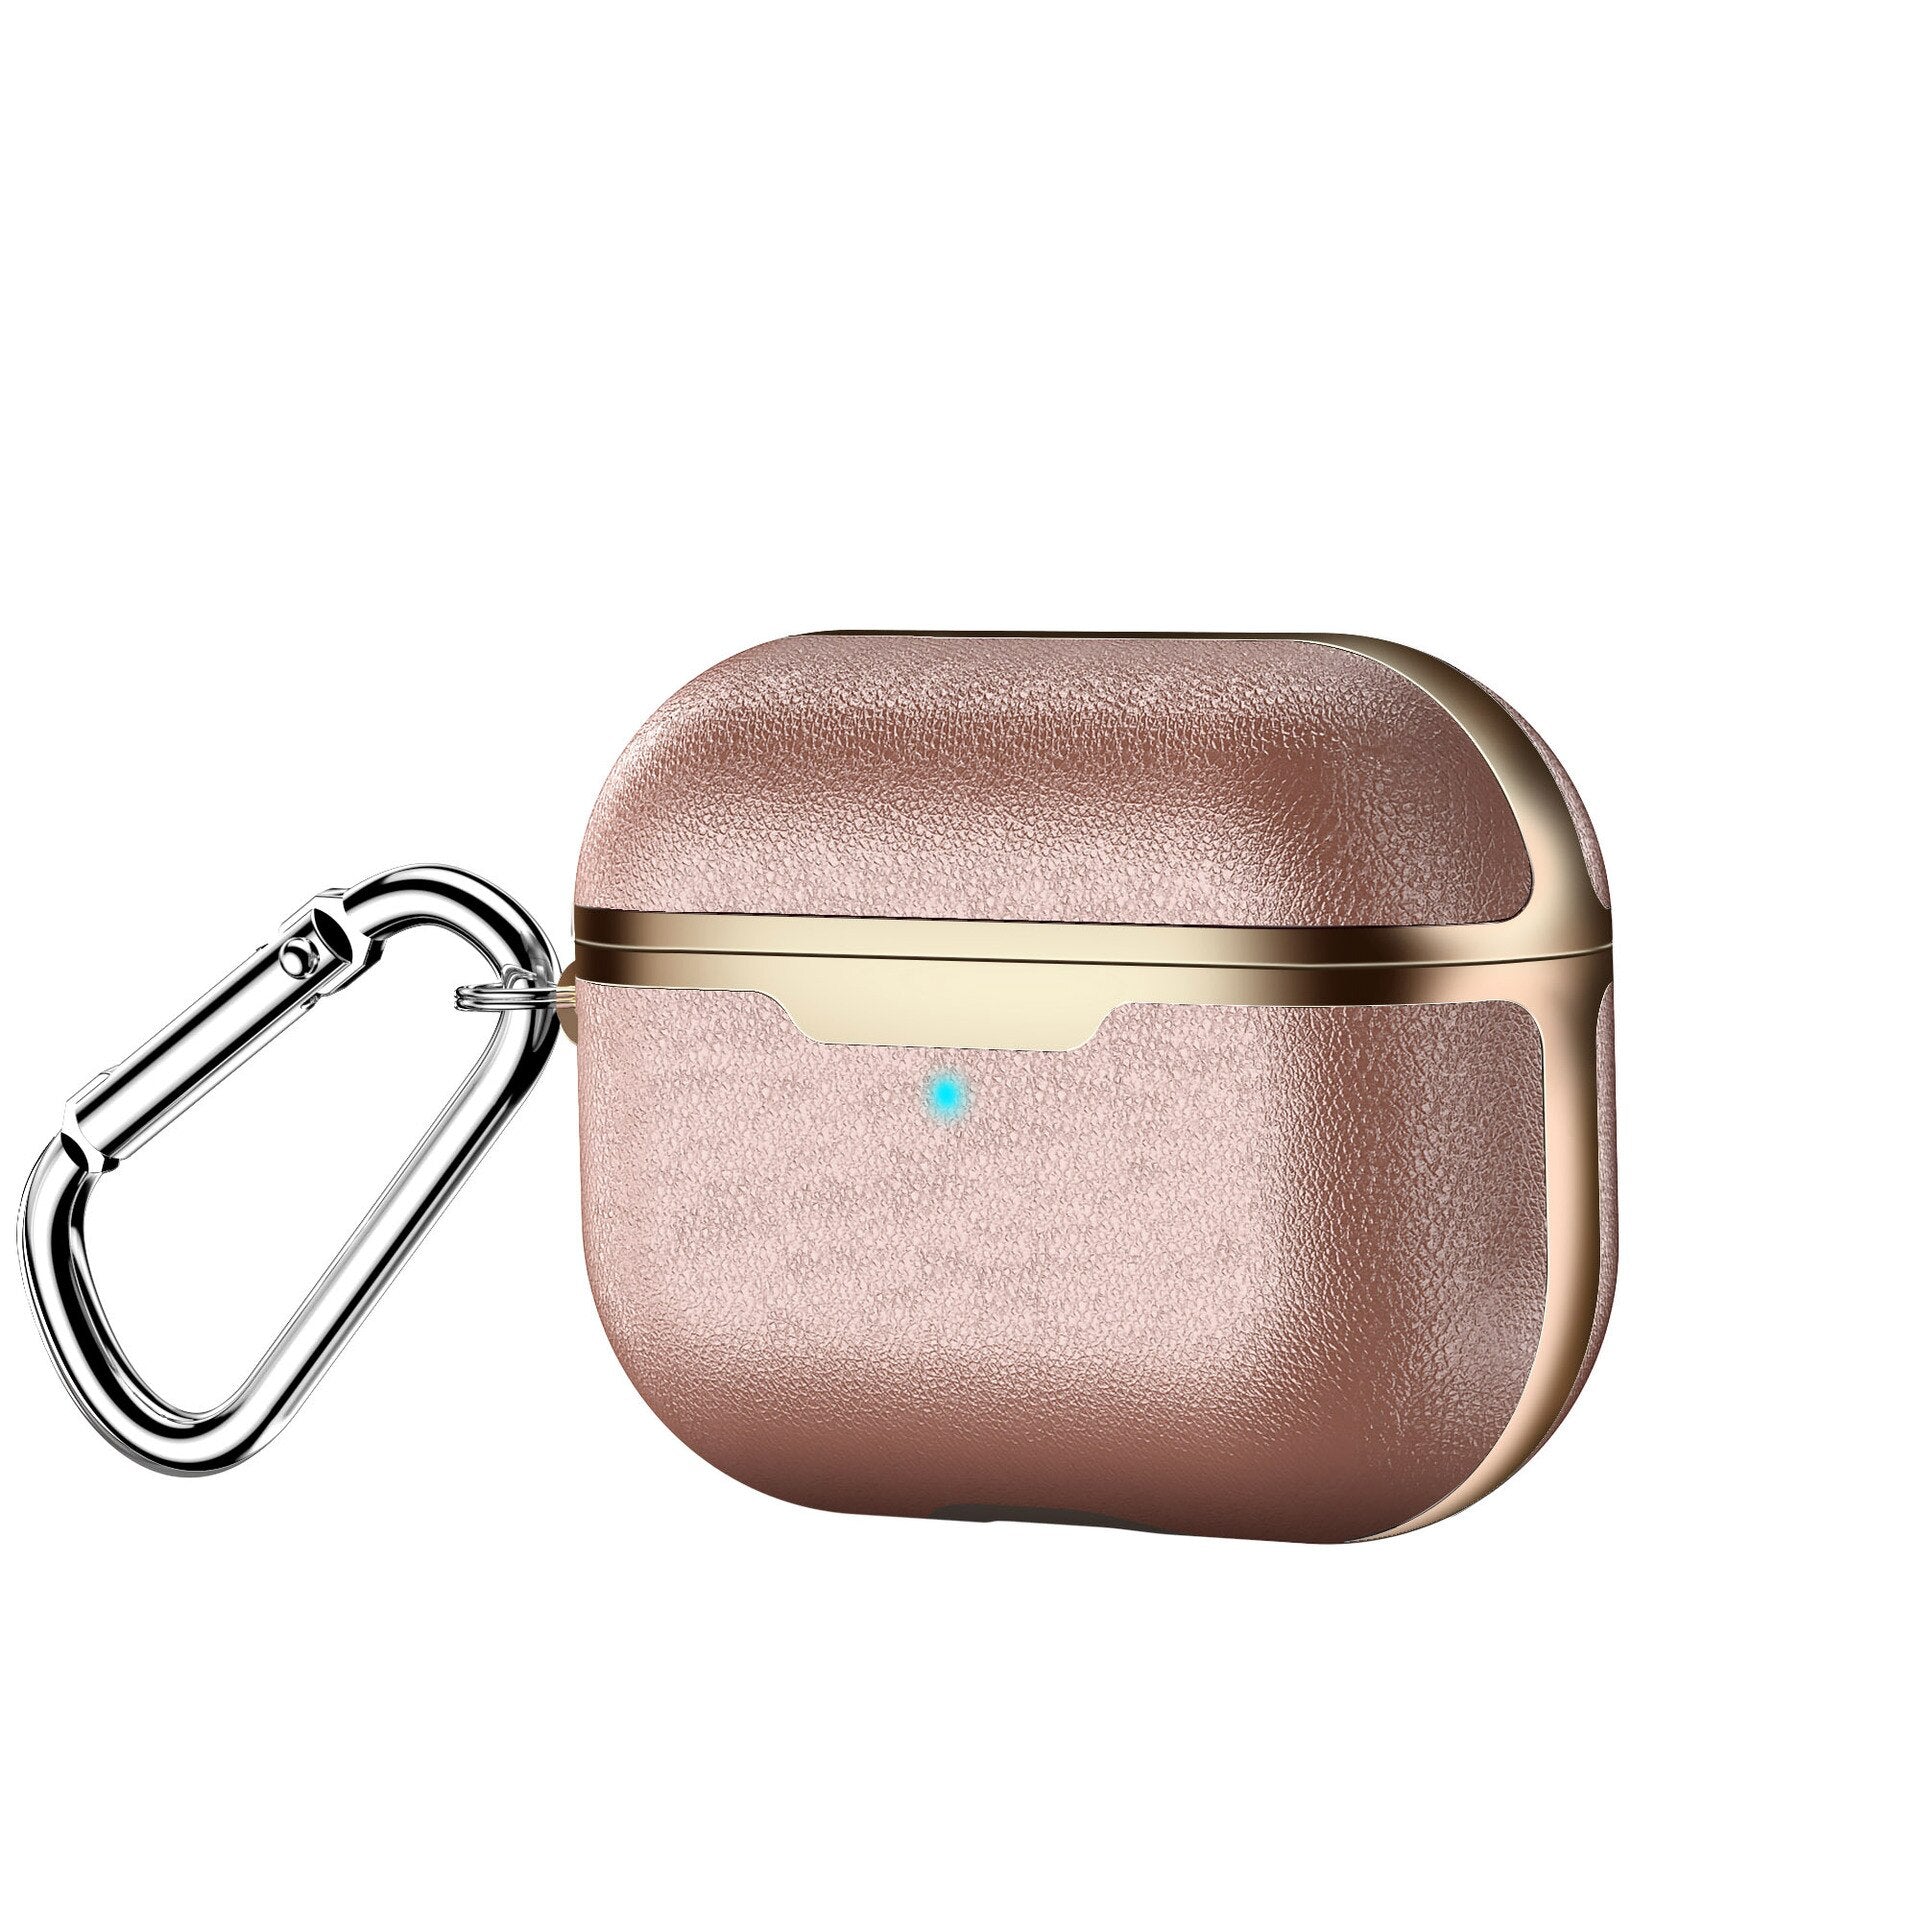 For AirPods Pro Cases Successful people Portable Leather luxury Protector Cover Carabiner for Apple AirPods 1 2 Case Plated Gold - 200001619 United States / brown Pro Find Epic Store